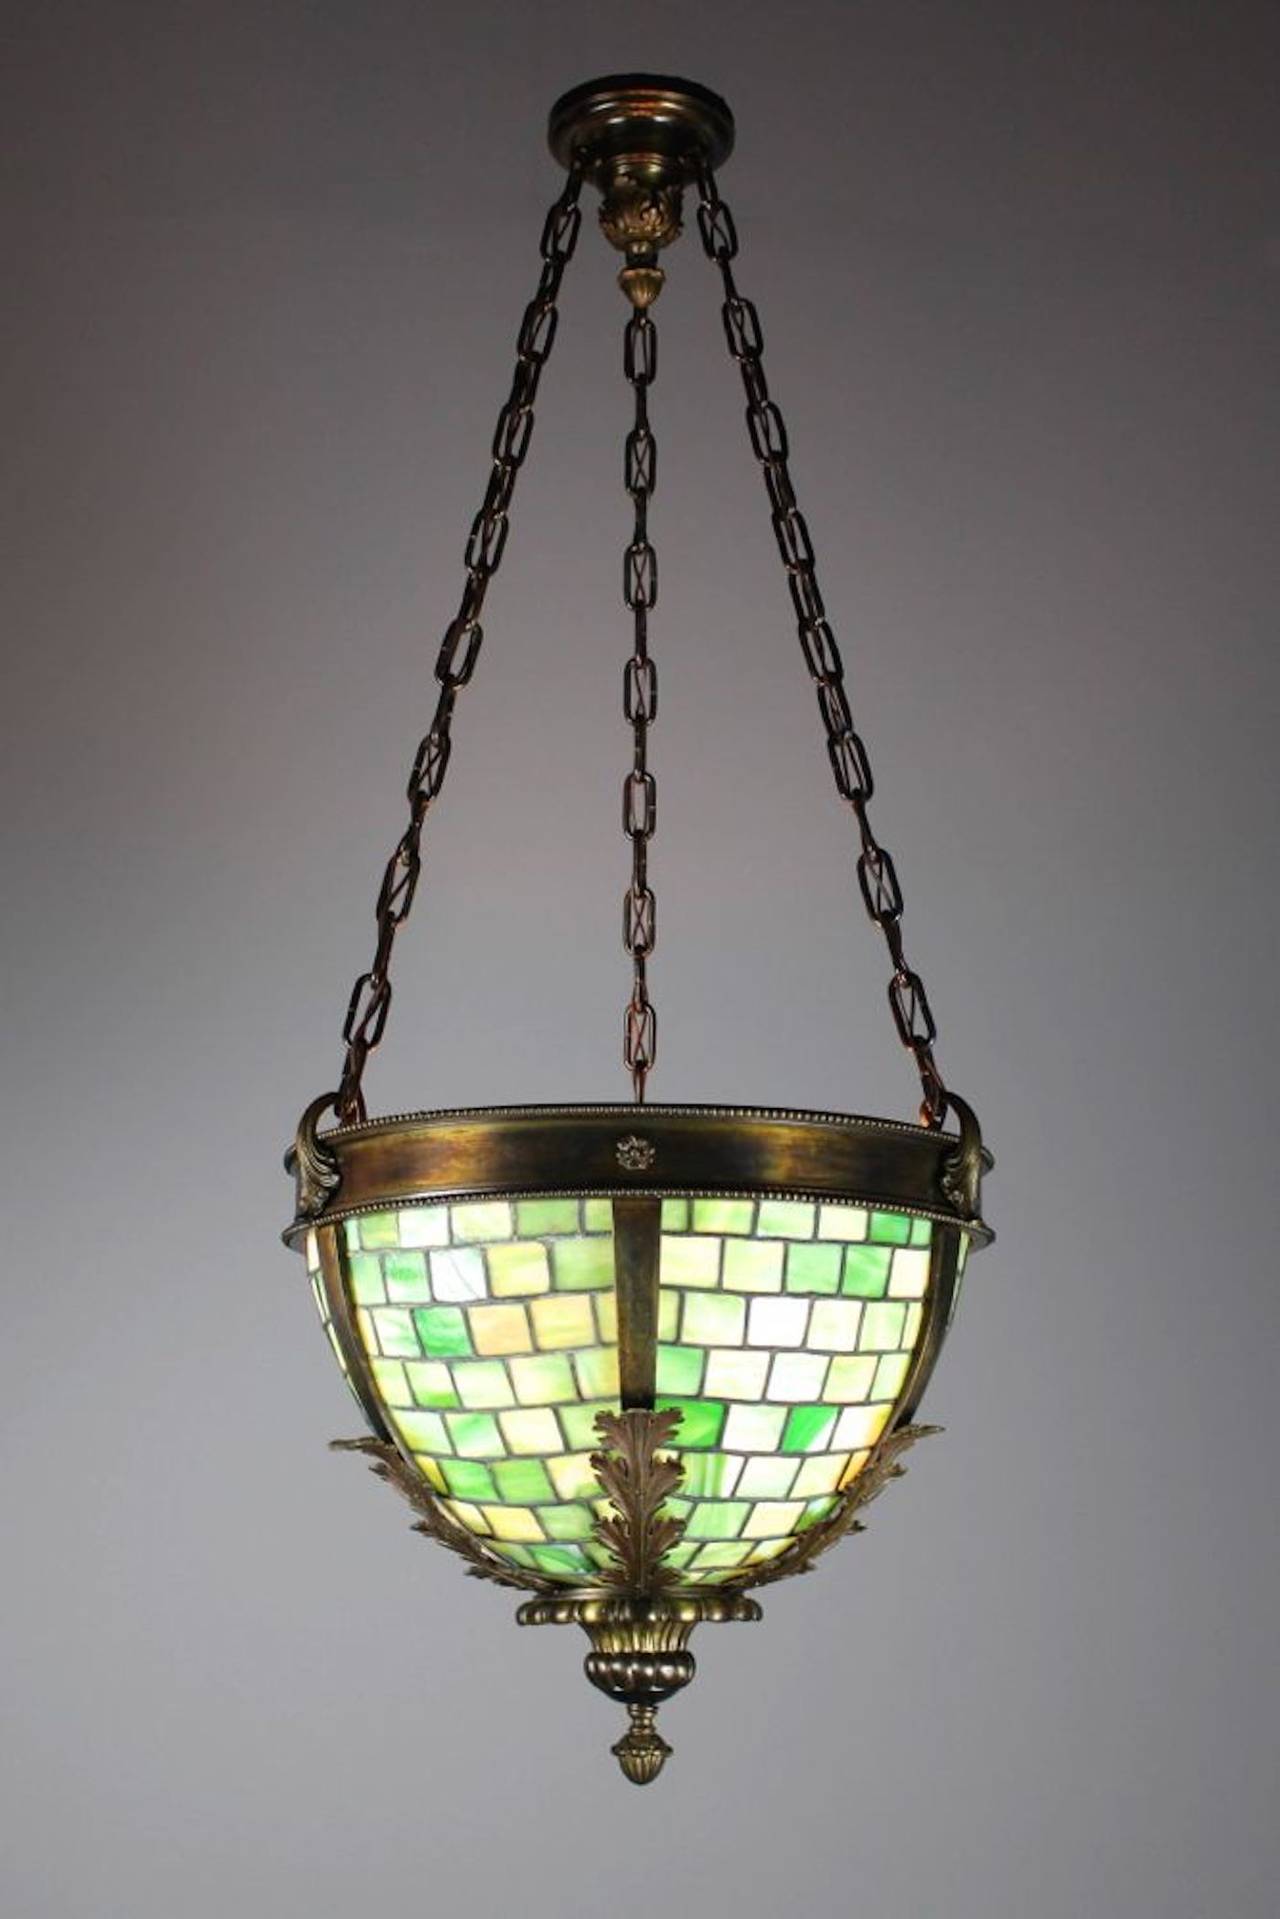 Ca. 1915. This is an exceptionally cast brass bowl fixture, fitted with green slag glass leaded panels, featuring decorative foliate castings. This light is truly lovely to look upon, and made with quality craftsmanship. Retaining an interesting,